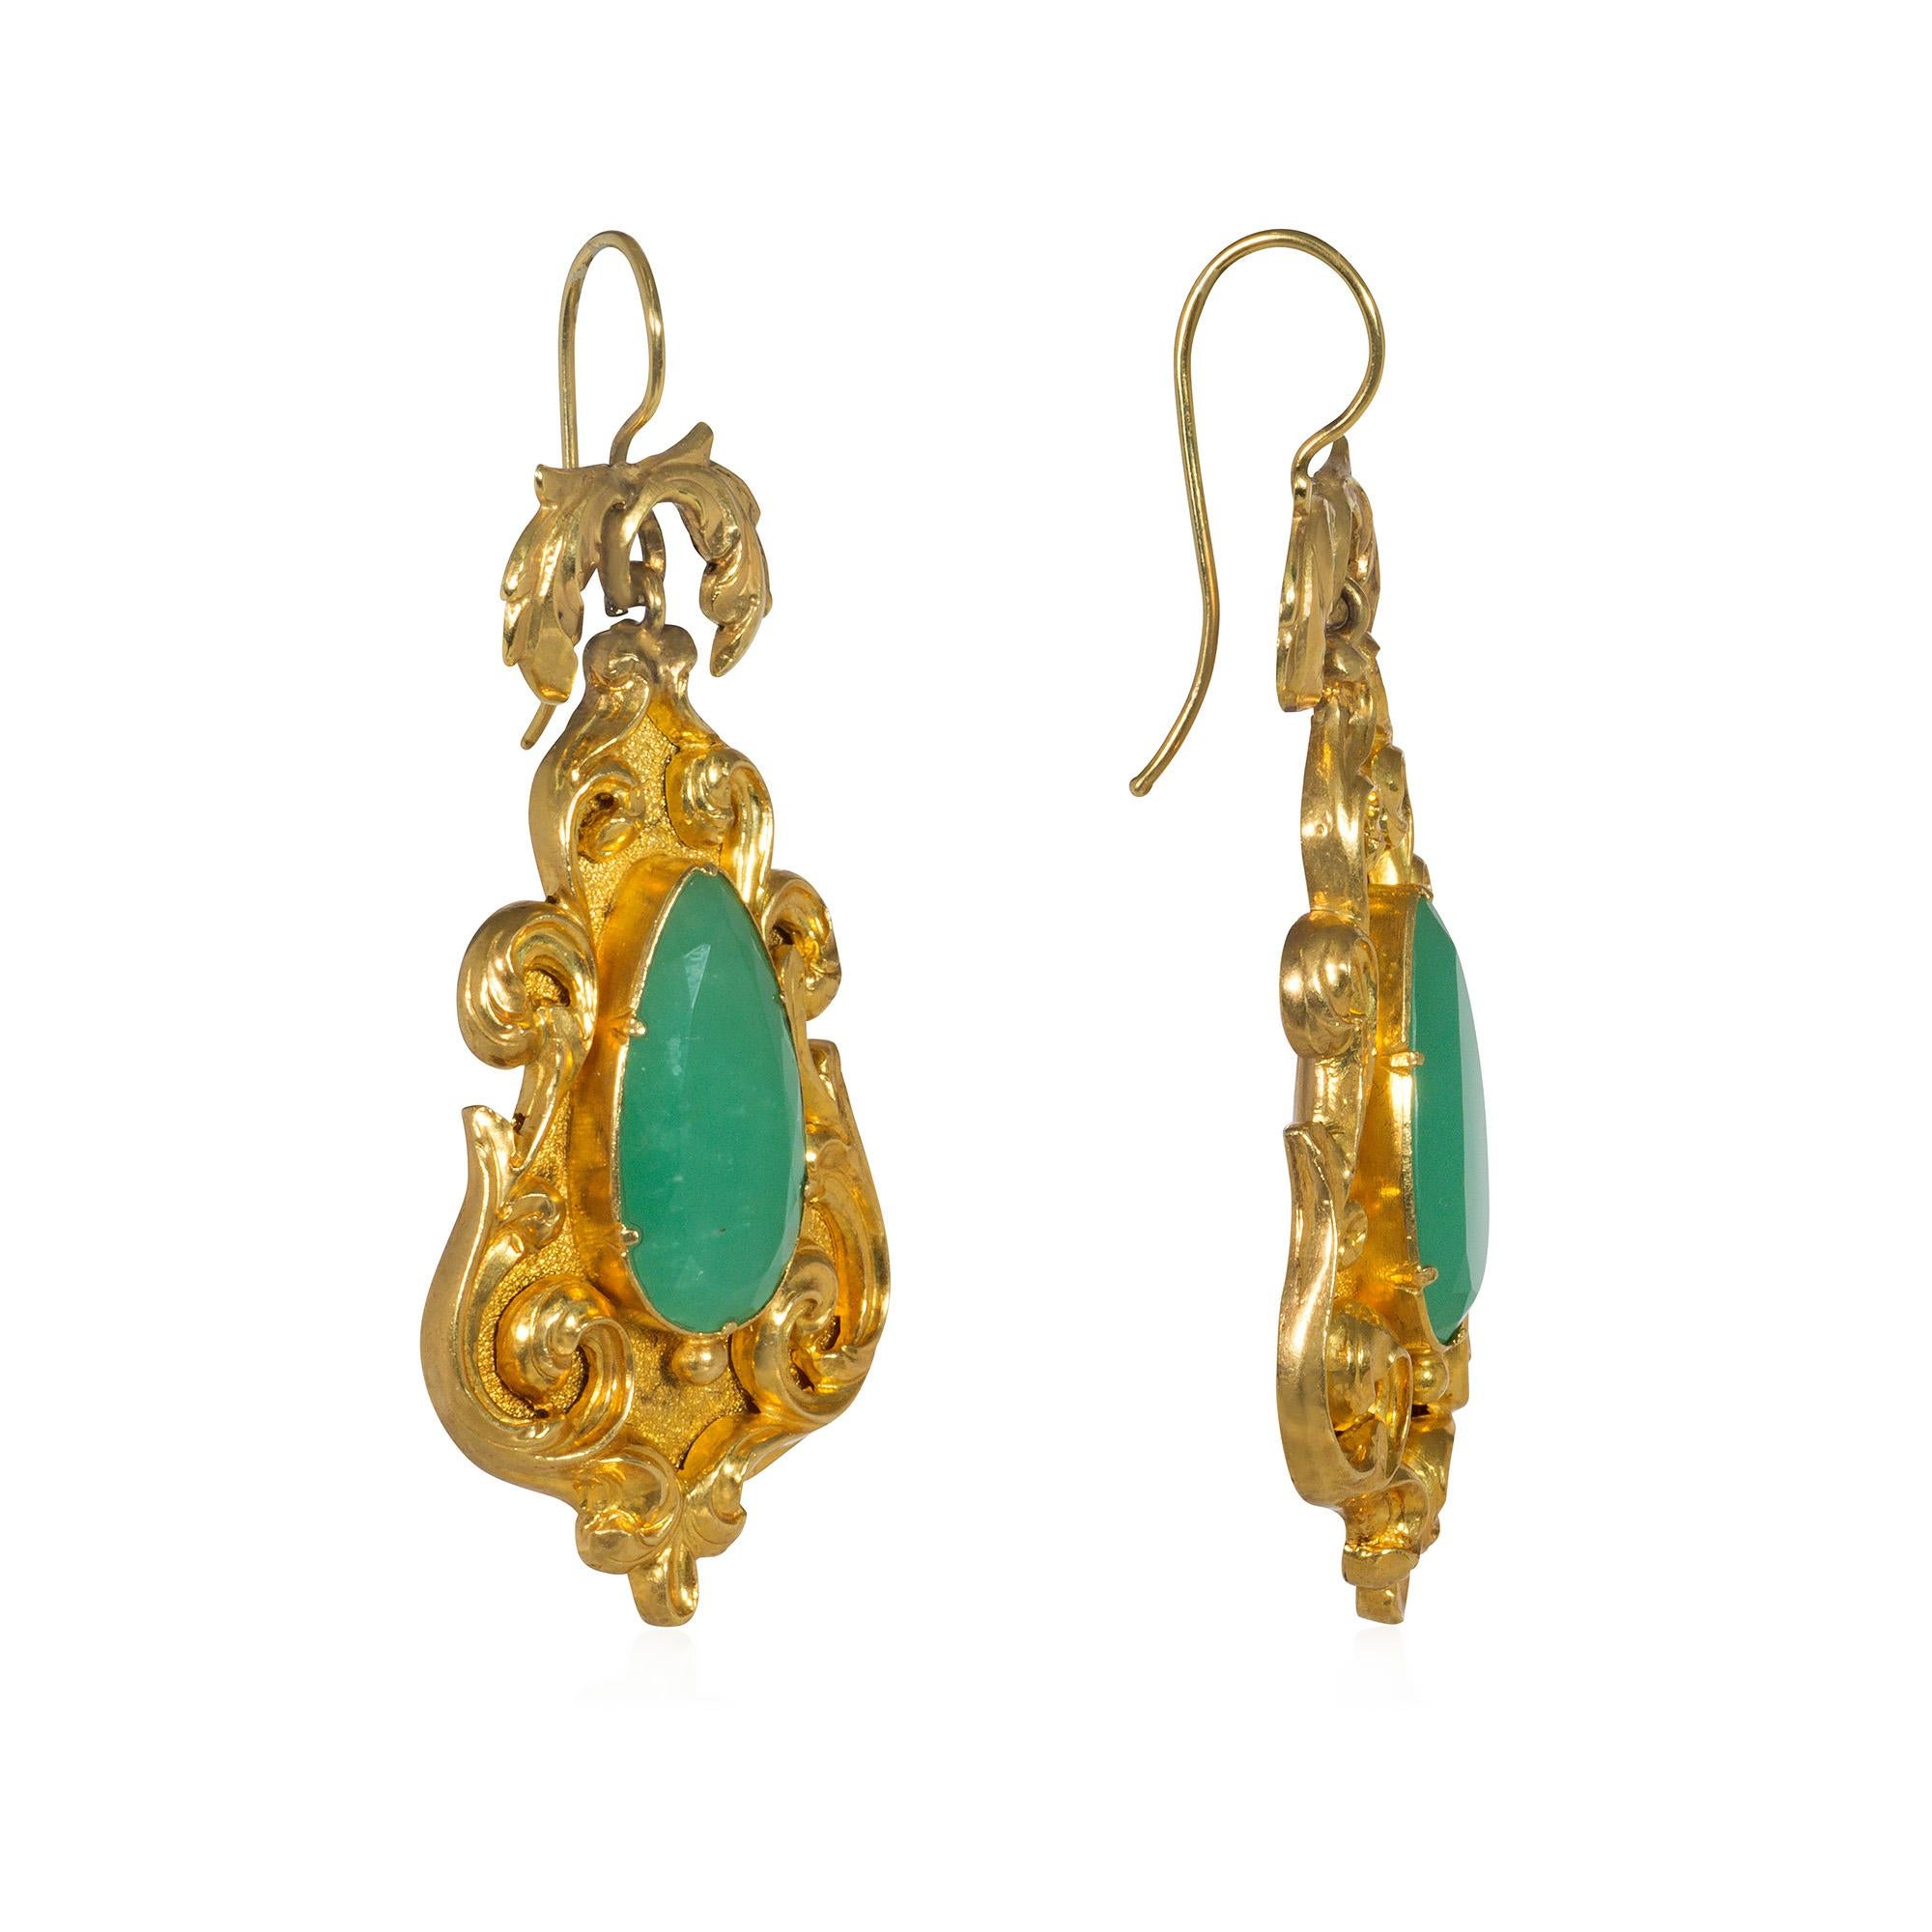 A pair of Georgian gold pendant earrings comprised of drop-shaped chrysoprase within a repoussé frame of scrolled foliate design, suspending from double leaf-shaped surmounts, in 15k.  England

Dimensions: 2.5